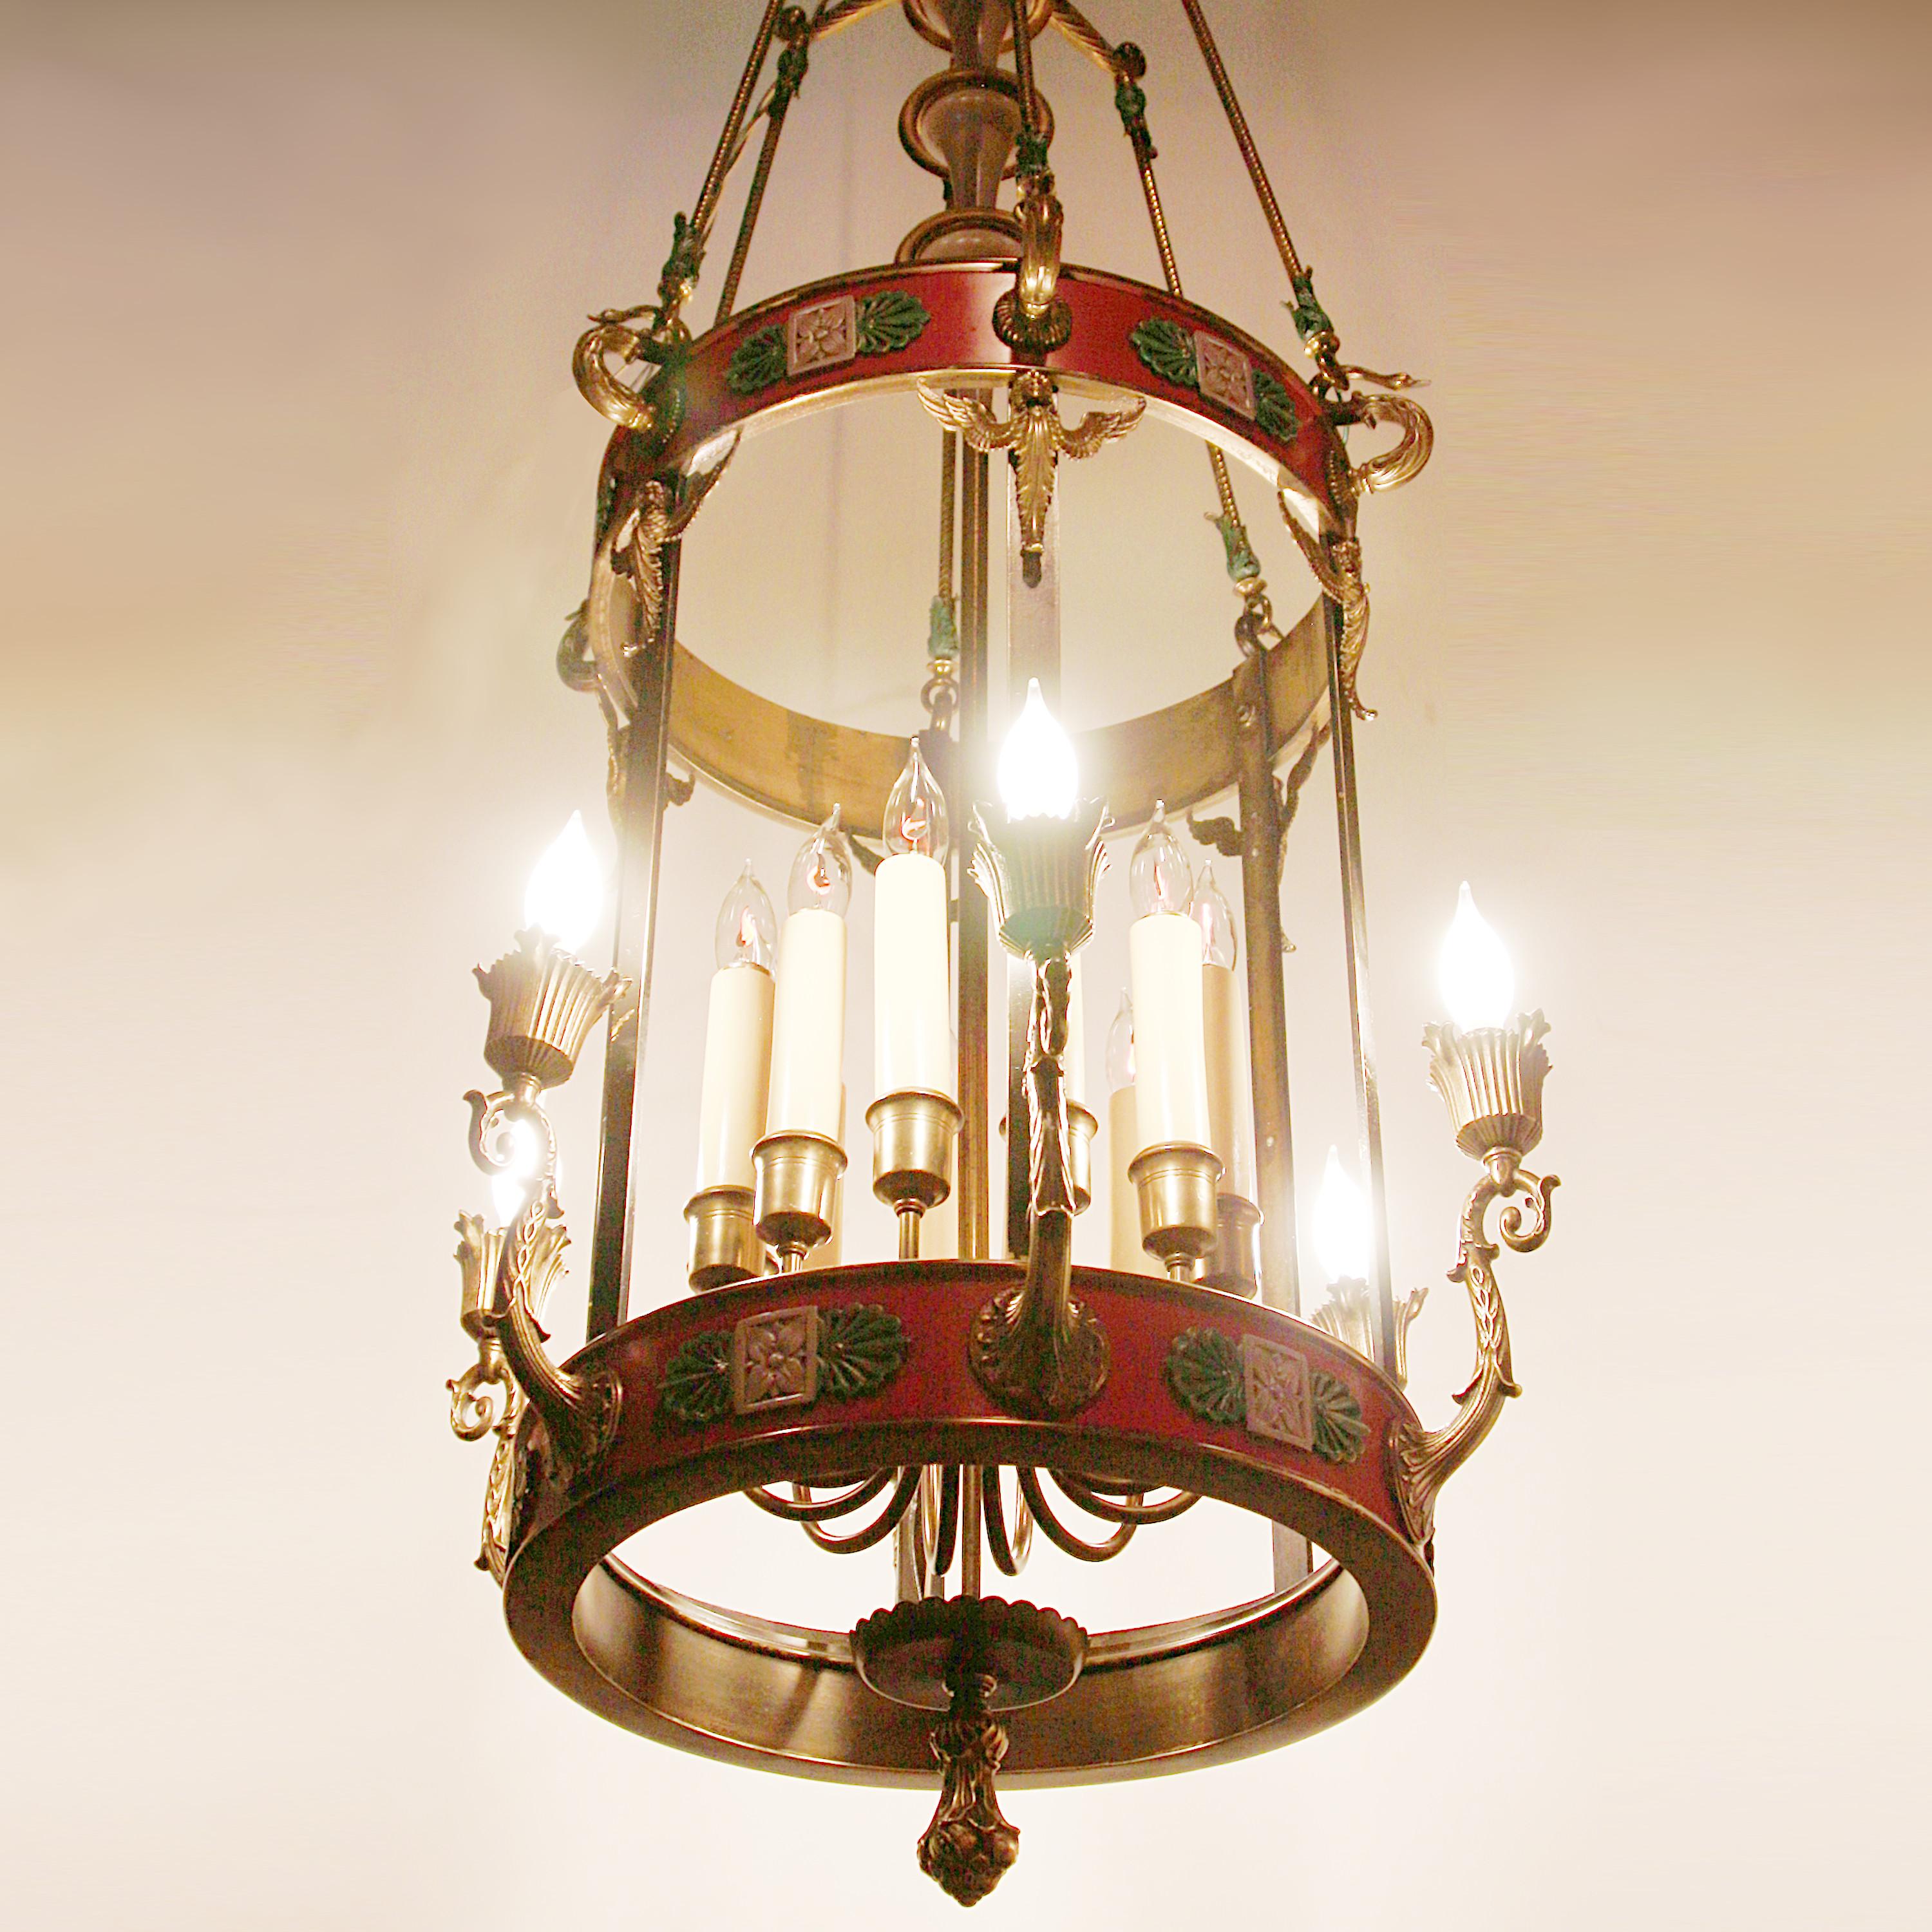 American 1913 French Empire Revival Brass Chandelier from Hotel Wisconsin in Milwaukee For Sale